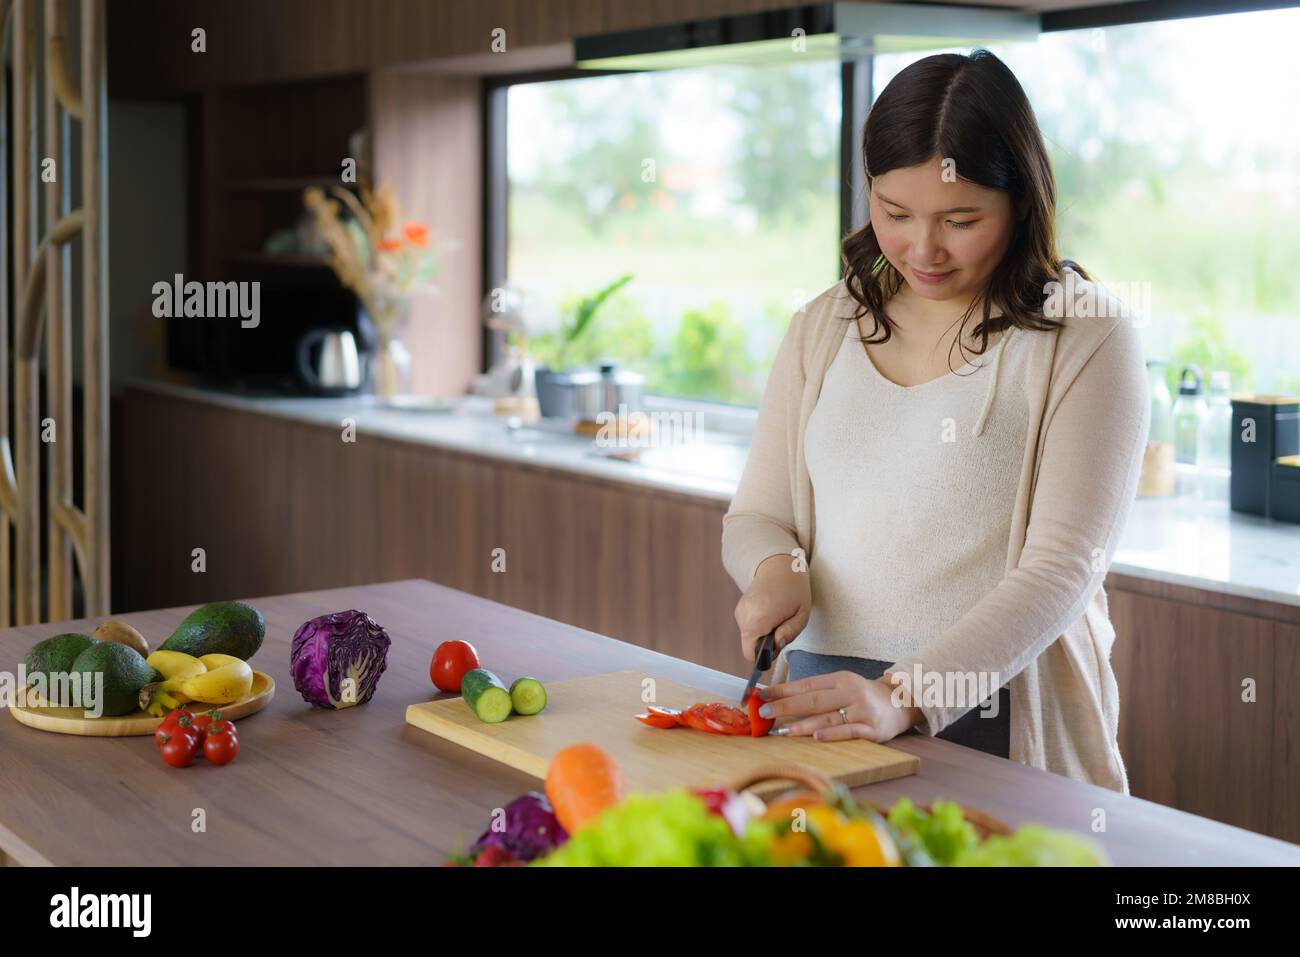 Pregnant Asian woman cutting tomato for fresh green salad, female prepares tasty organic dinner at home, healthy nutrition for future mother Stock Photo